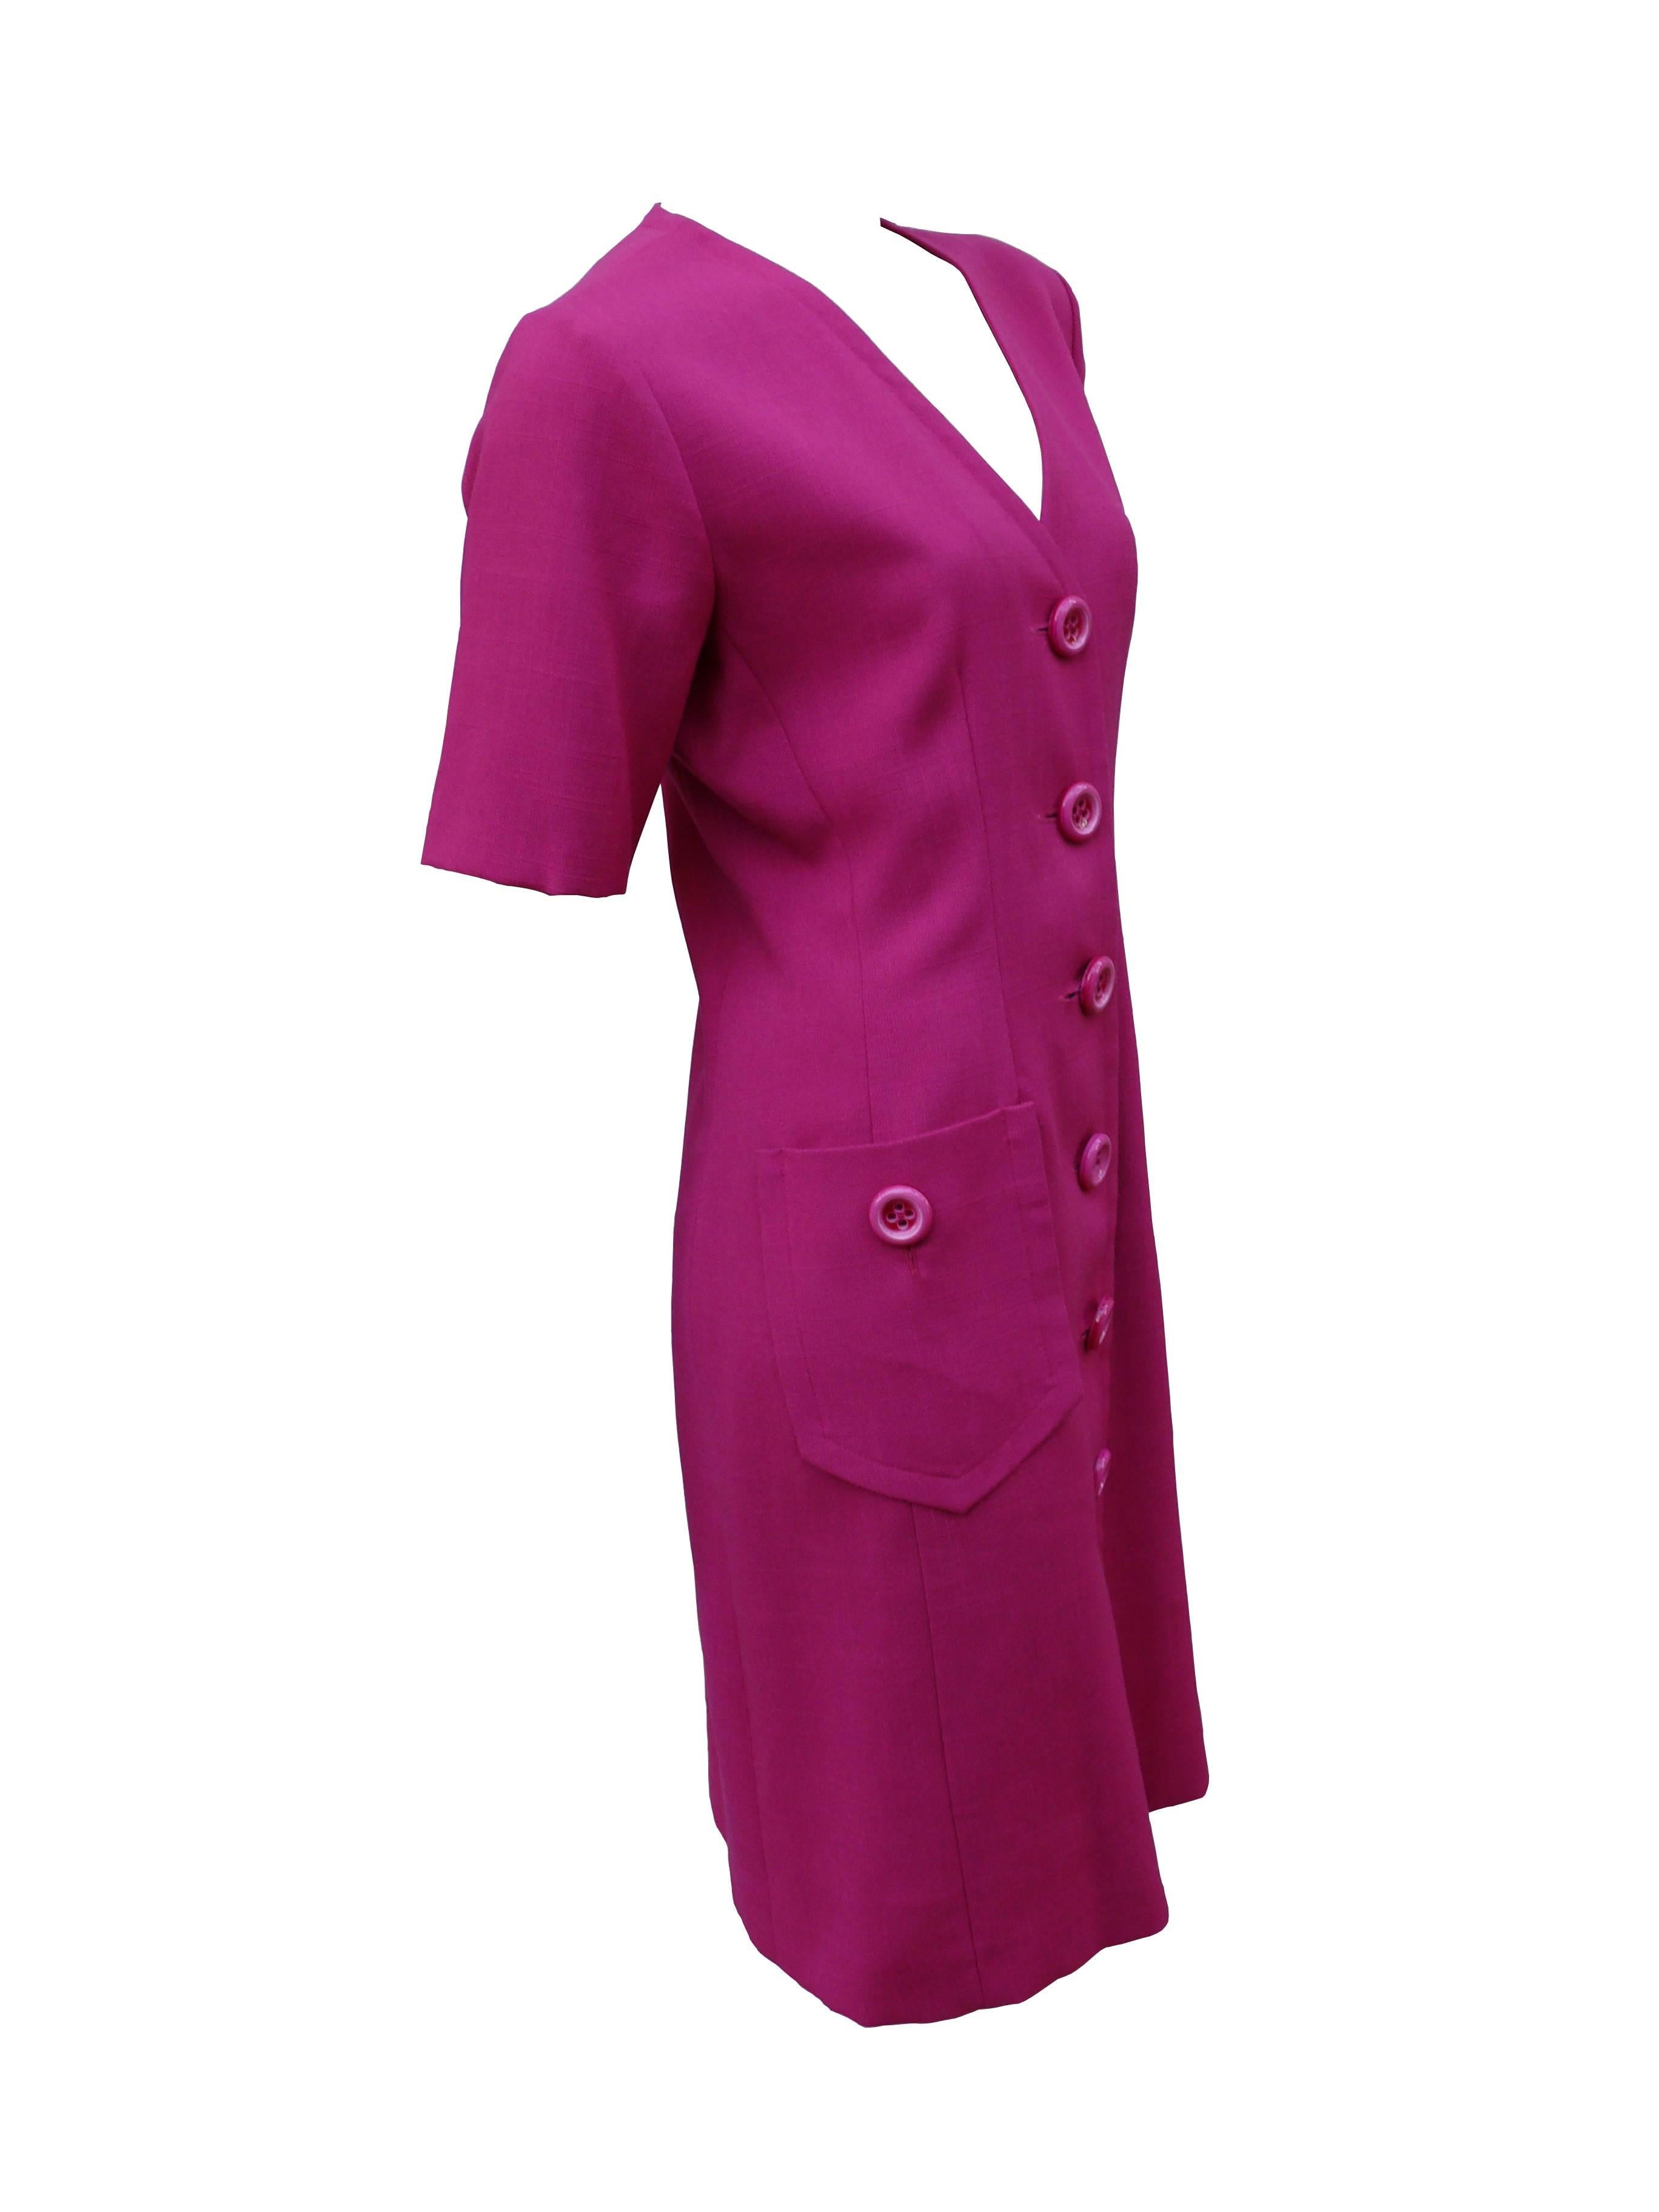 YVES SAINT LAURENT vintage gorgeous unworn fuchsia tunic dress.

Short sleeves.
Large buttons.
2 front pockets.
Unlined.

Label reads Yves Saint Laurent Variation Made in France.

Size tag reads : F 40 / US 8.

Composition tag reads : 50 % Rayon /